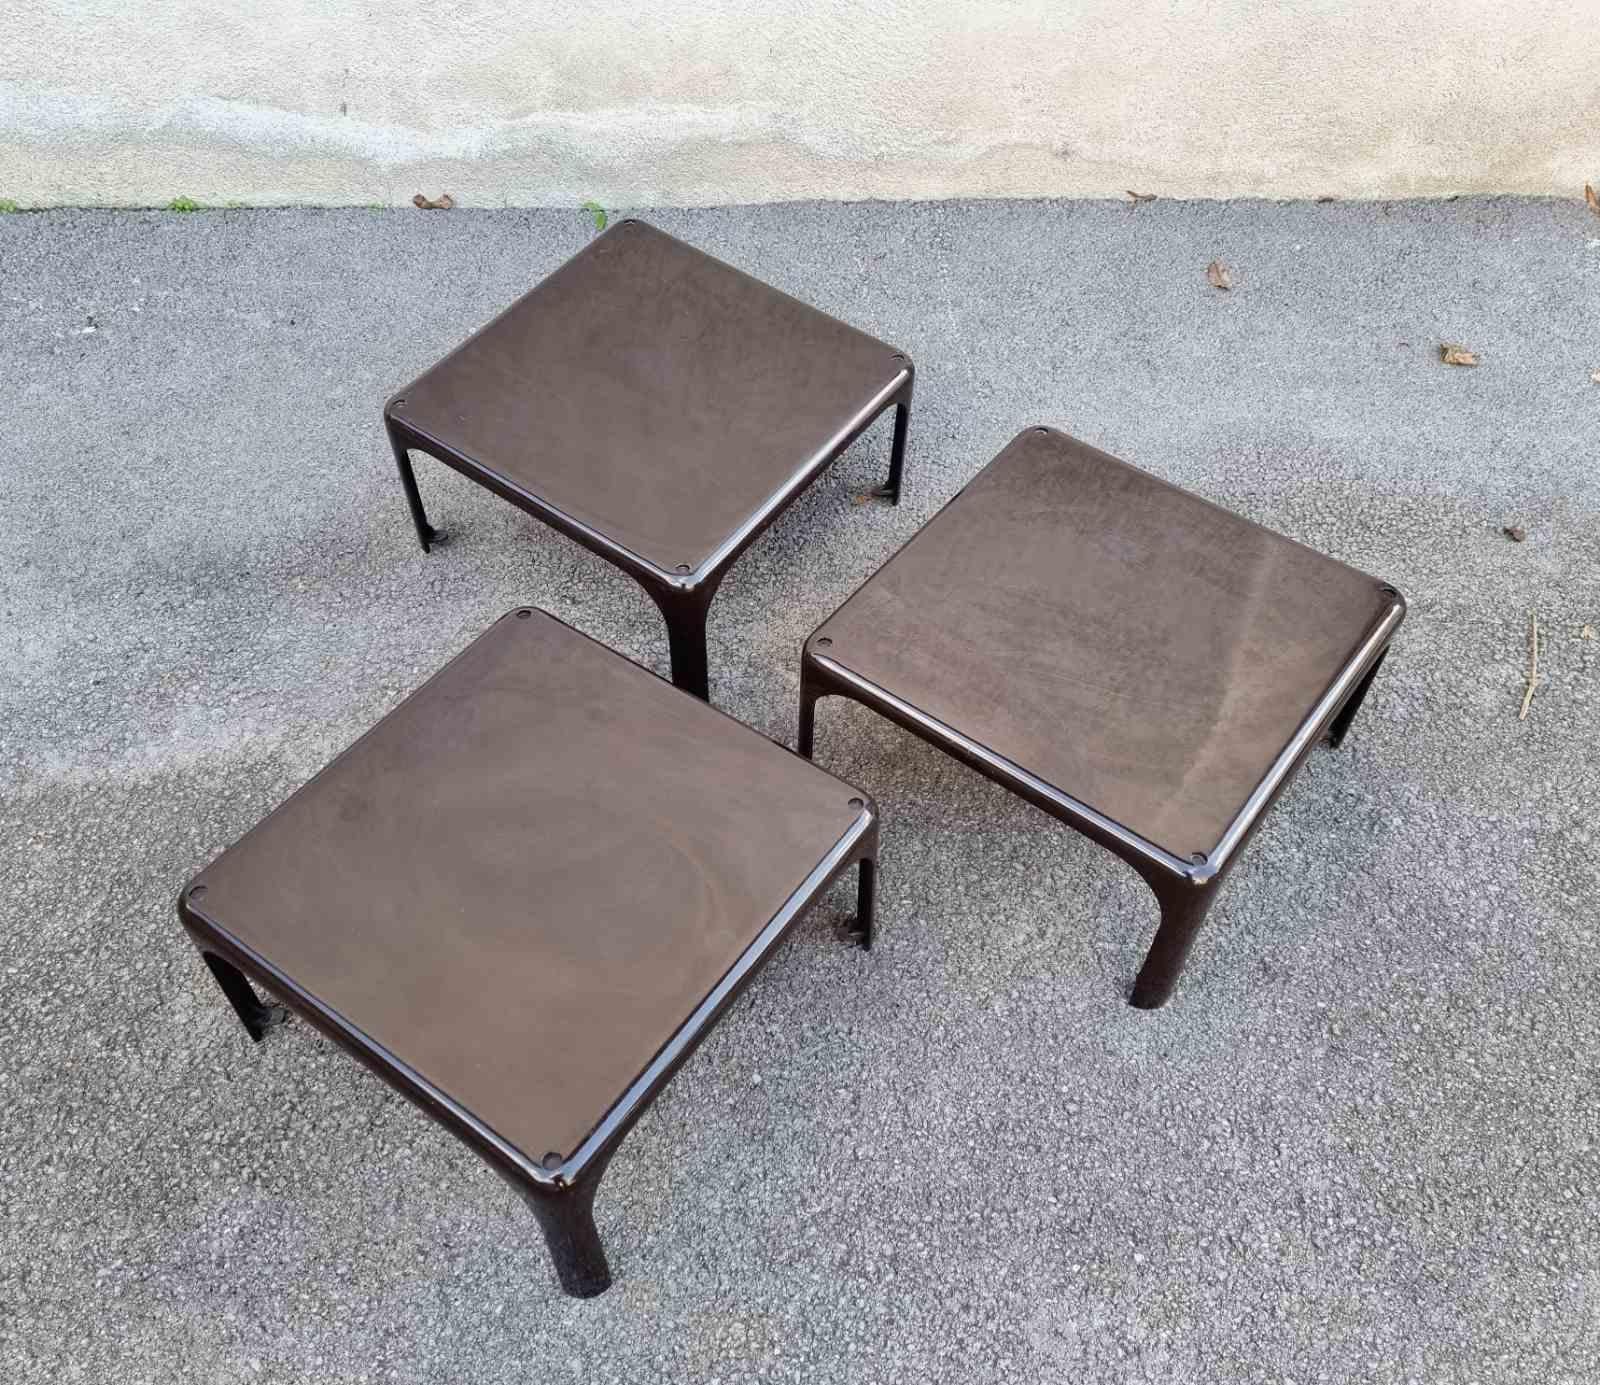 Mid-20th Century Stackable Tables Demetrio 45 by Vico Magistretti for Artemide, Italy 60s For Sale